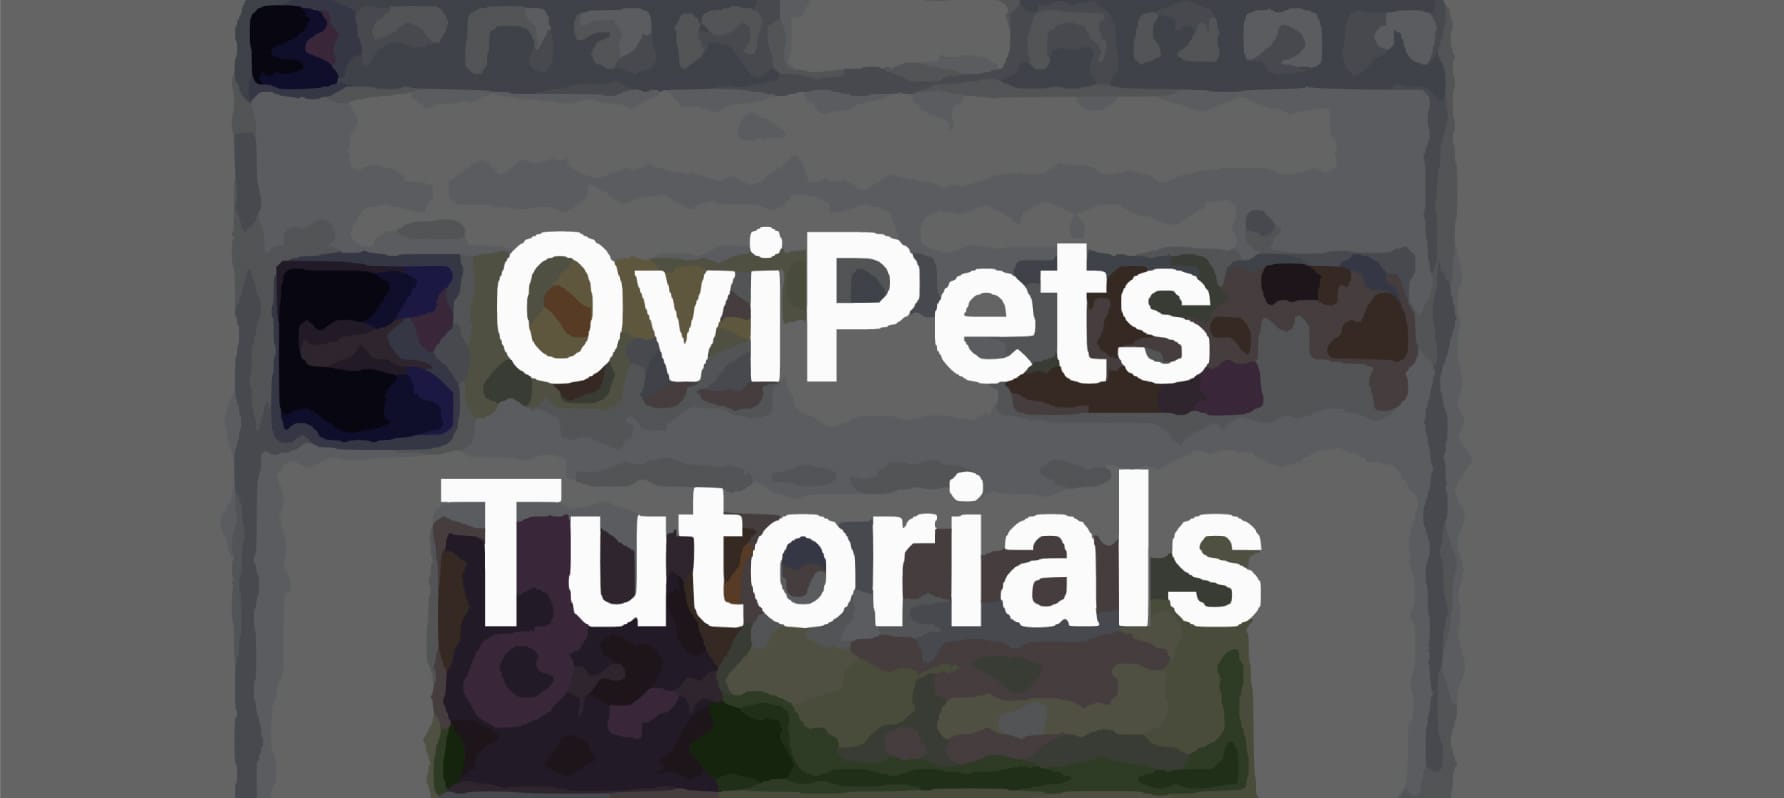 New feature: OviPets Tutorials image